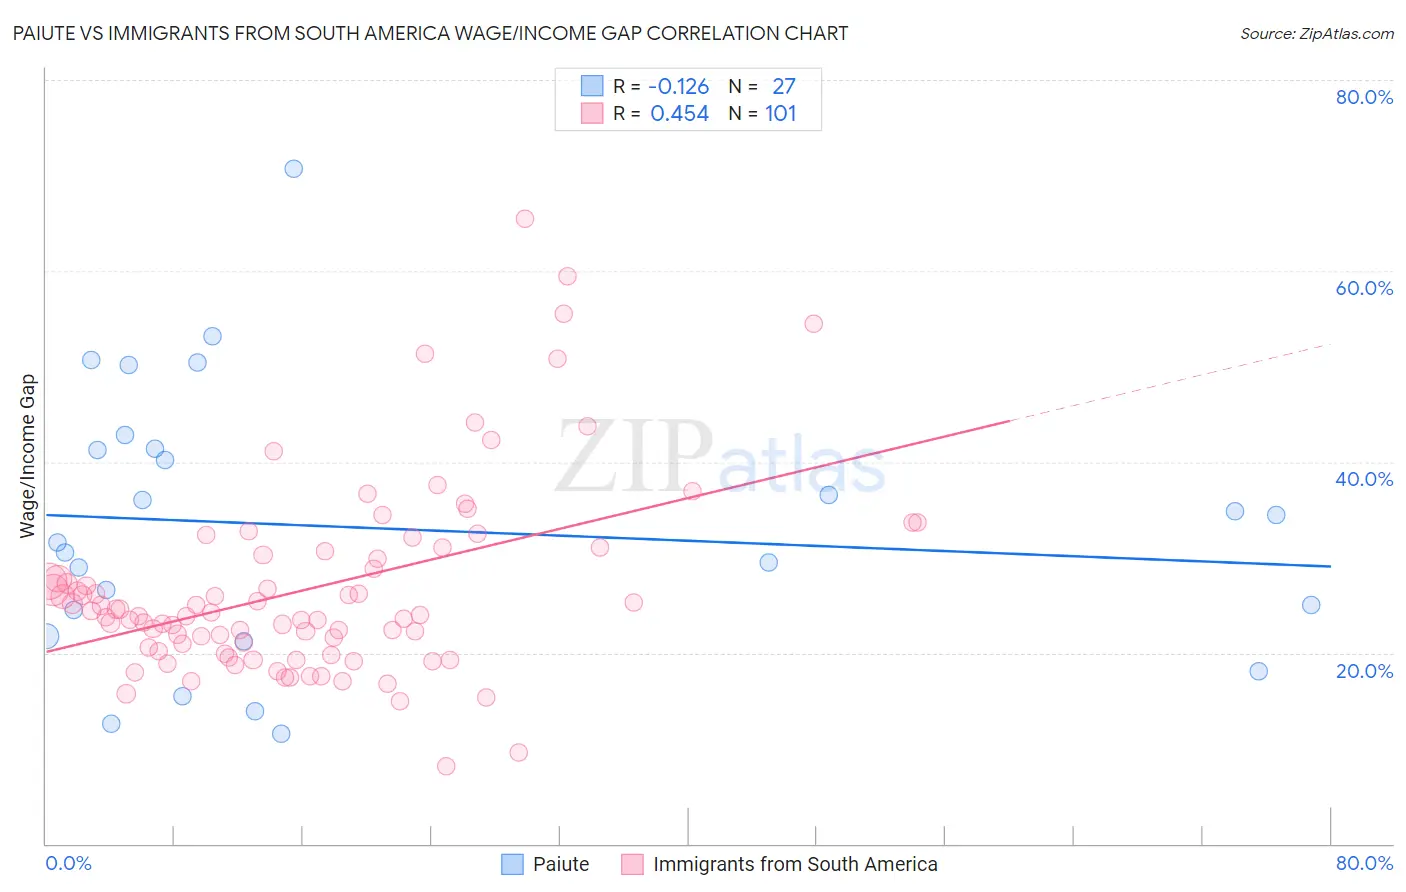 Paiute vs Immigrants from South America Wage/Income Gap